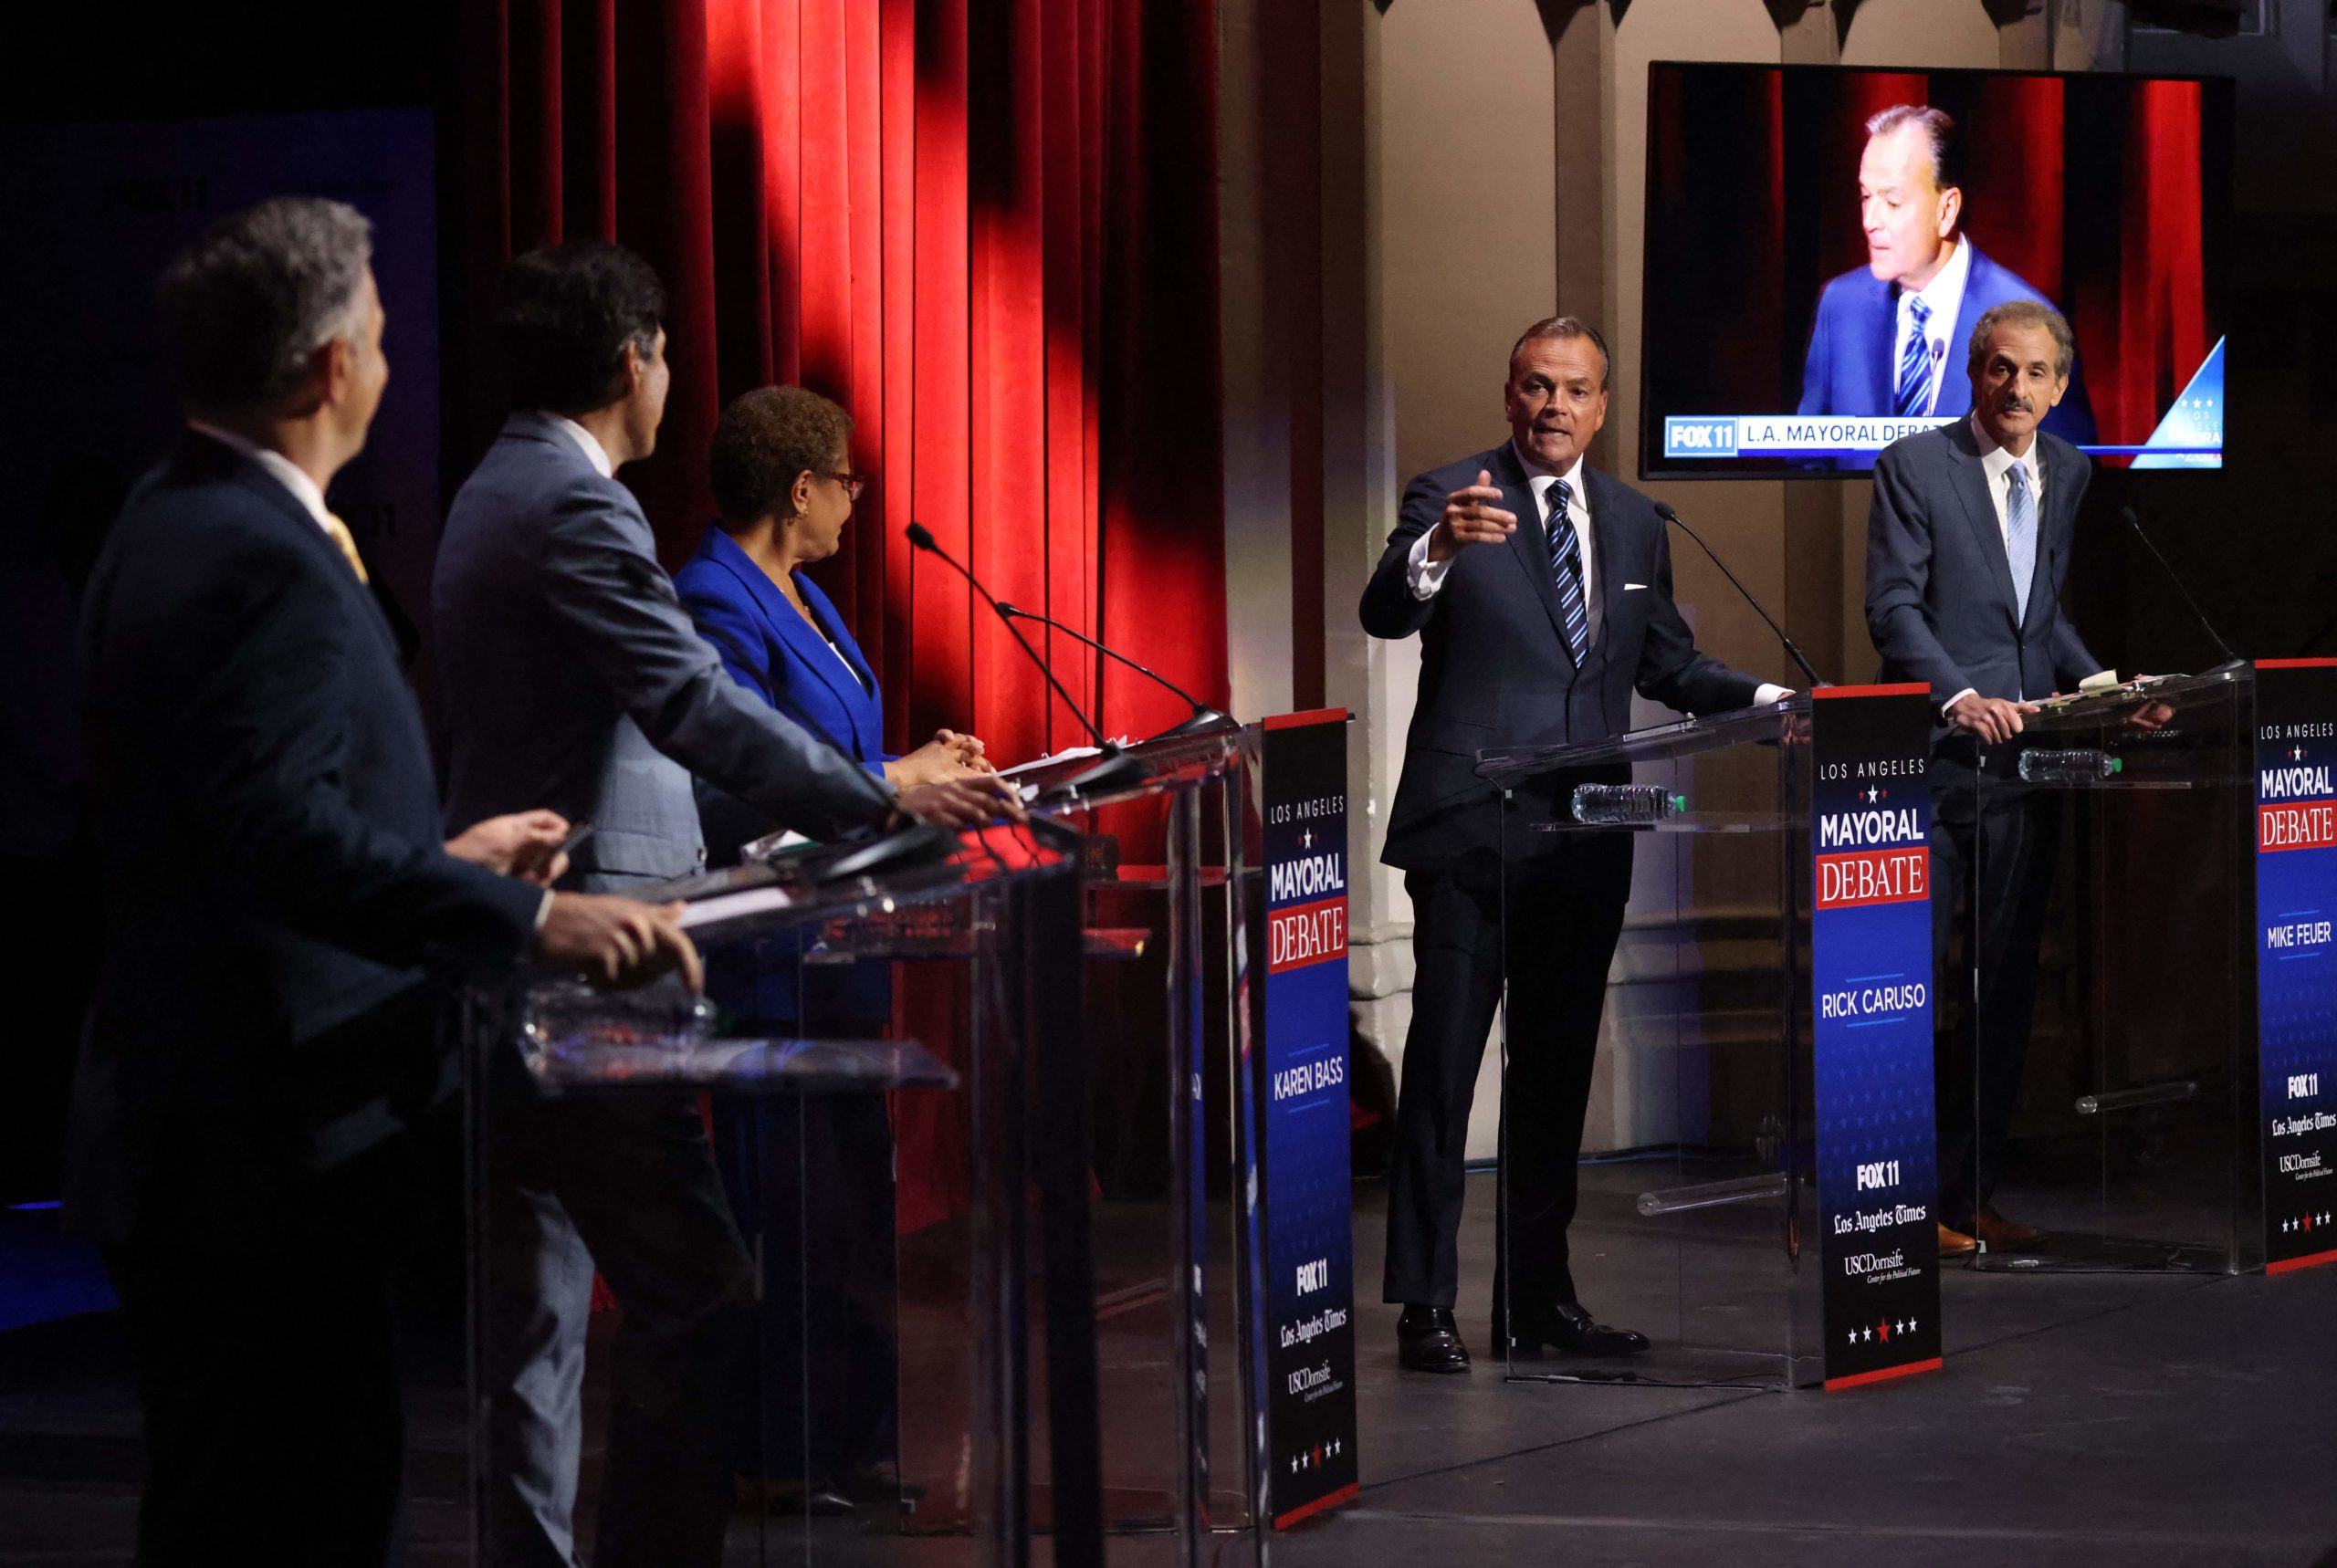 Rick Caruso (2nd R) makes a rebuttal during the mayoral debate with candidates (from L) Joe Buscaino, Kevin de Leon, Karen Bass and Mike Feuer at USC's Bovard Auditorium, March 22, 2022 in Los Angeles. (Photo by MYUNG J. CHUN/POOL/AFP via Getty Images)